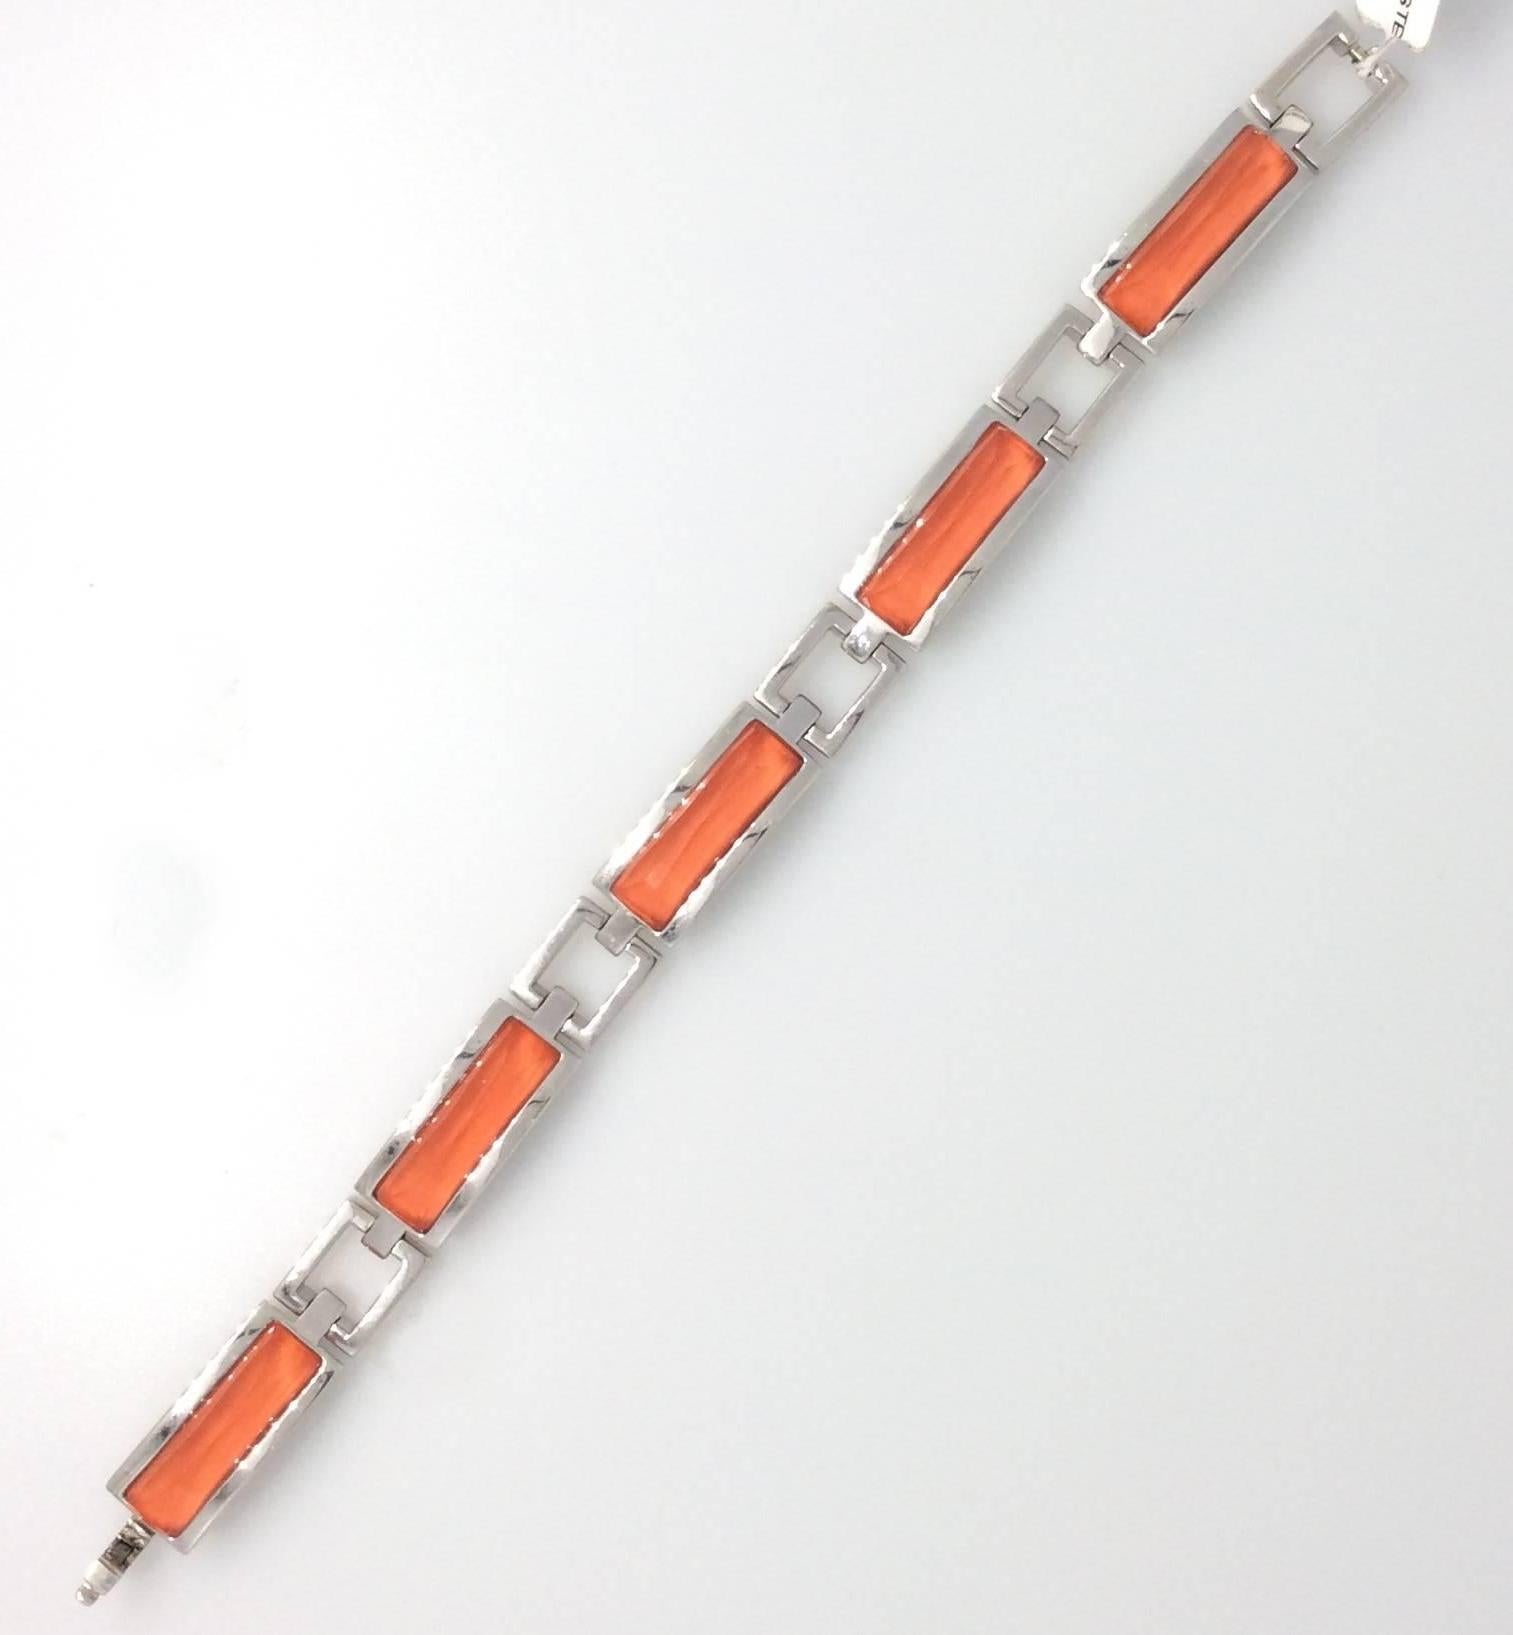 From Stephen Webster's Crystal Haze collection, 18k White Gold links with center sections of Coral and Faceted Quartz. Bracelet measures 7.25 inches in length and .4 inch in width. Weight is 55.1 grams. The back of each link is carved with Stephen